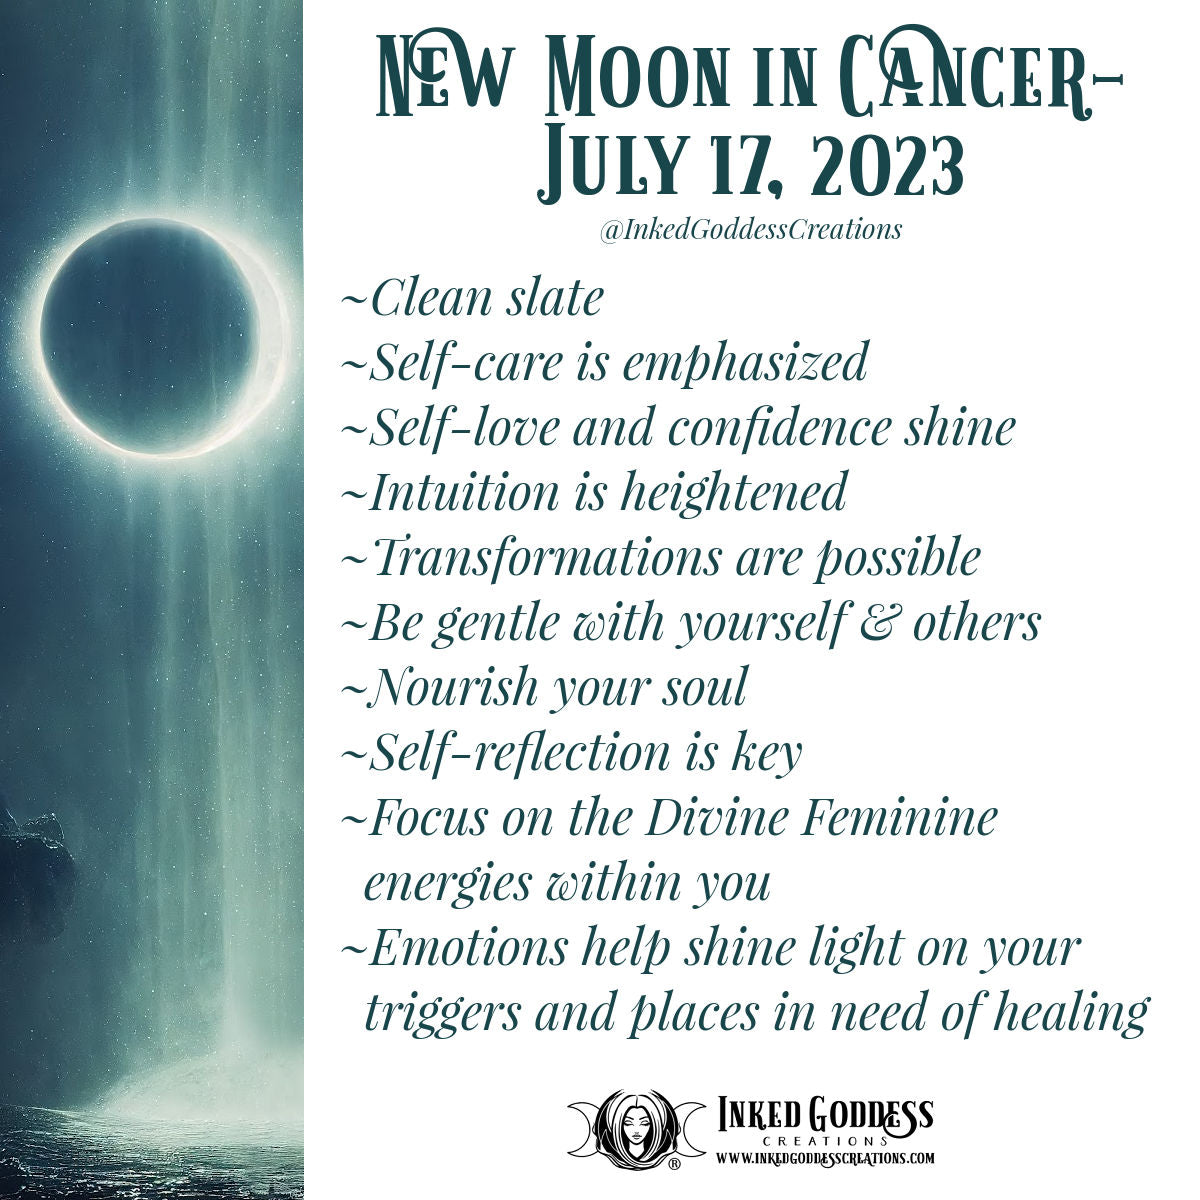 New Moon in Cancer- July 17, 2023